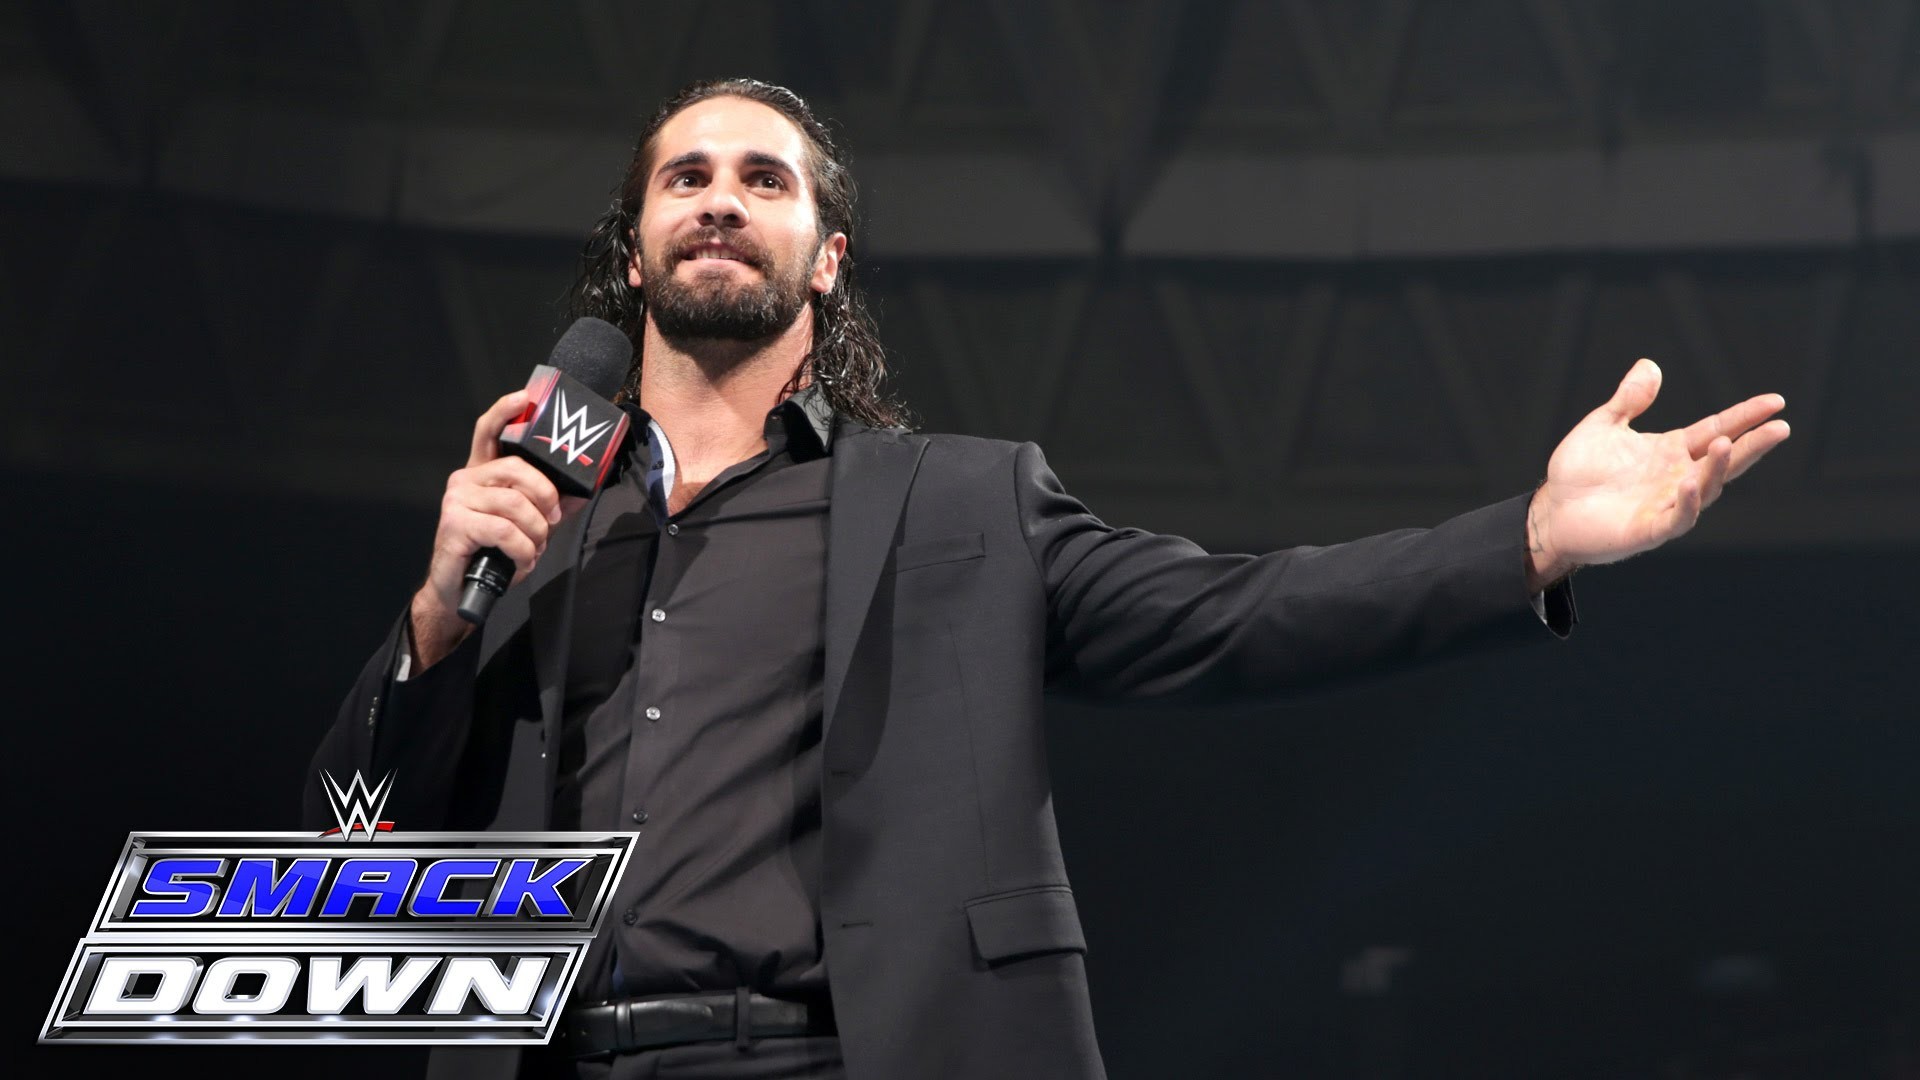 Seth Rollins returns to SmackDown and leaves with a smile on his face:  SmackDown, May 26, 2016